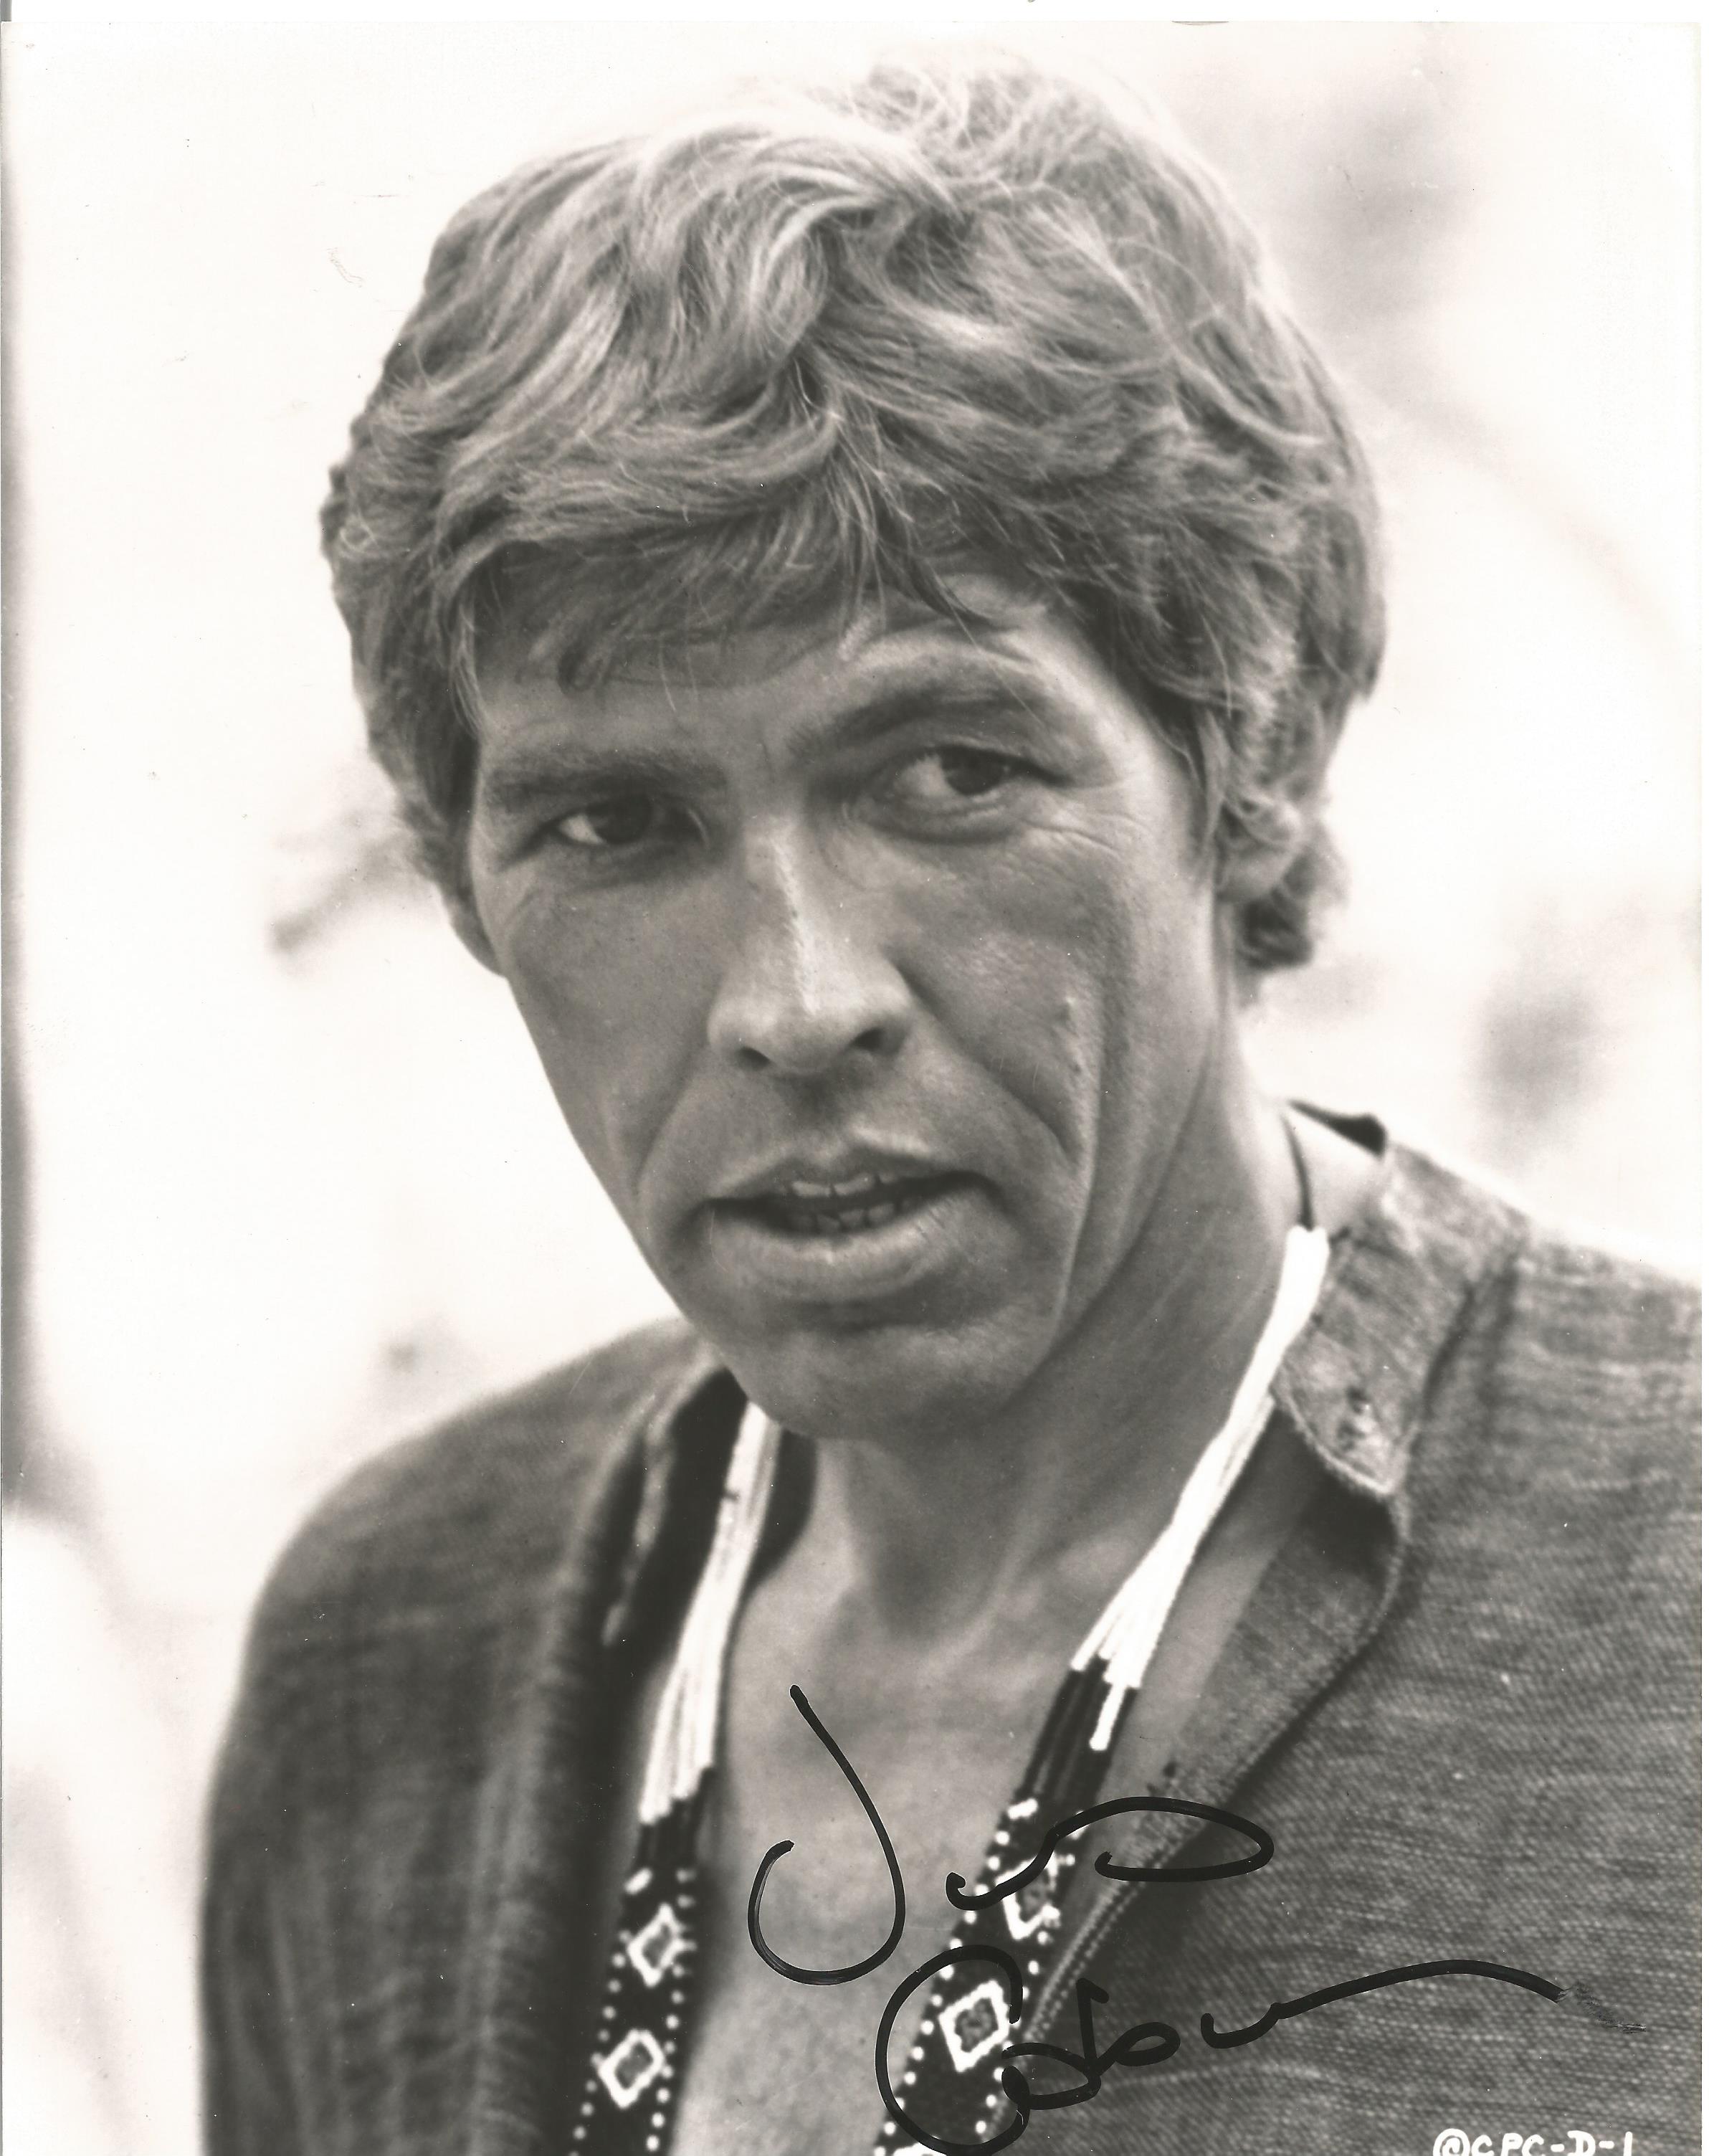 James Coburn signed 10x8 black and white photo. Good Condition. All autographs come with a